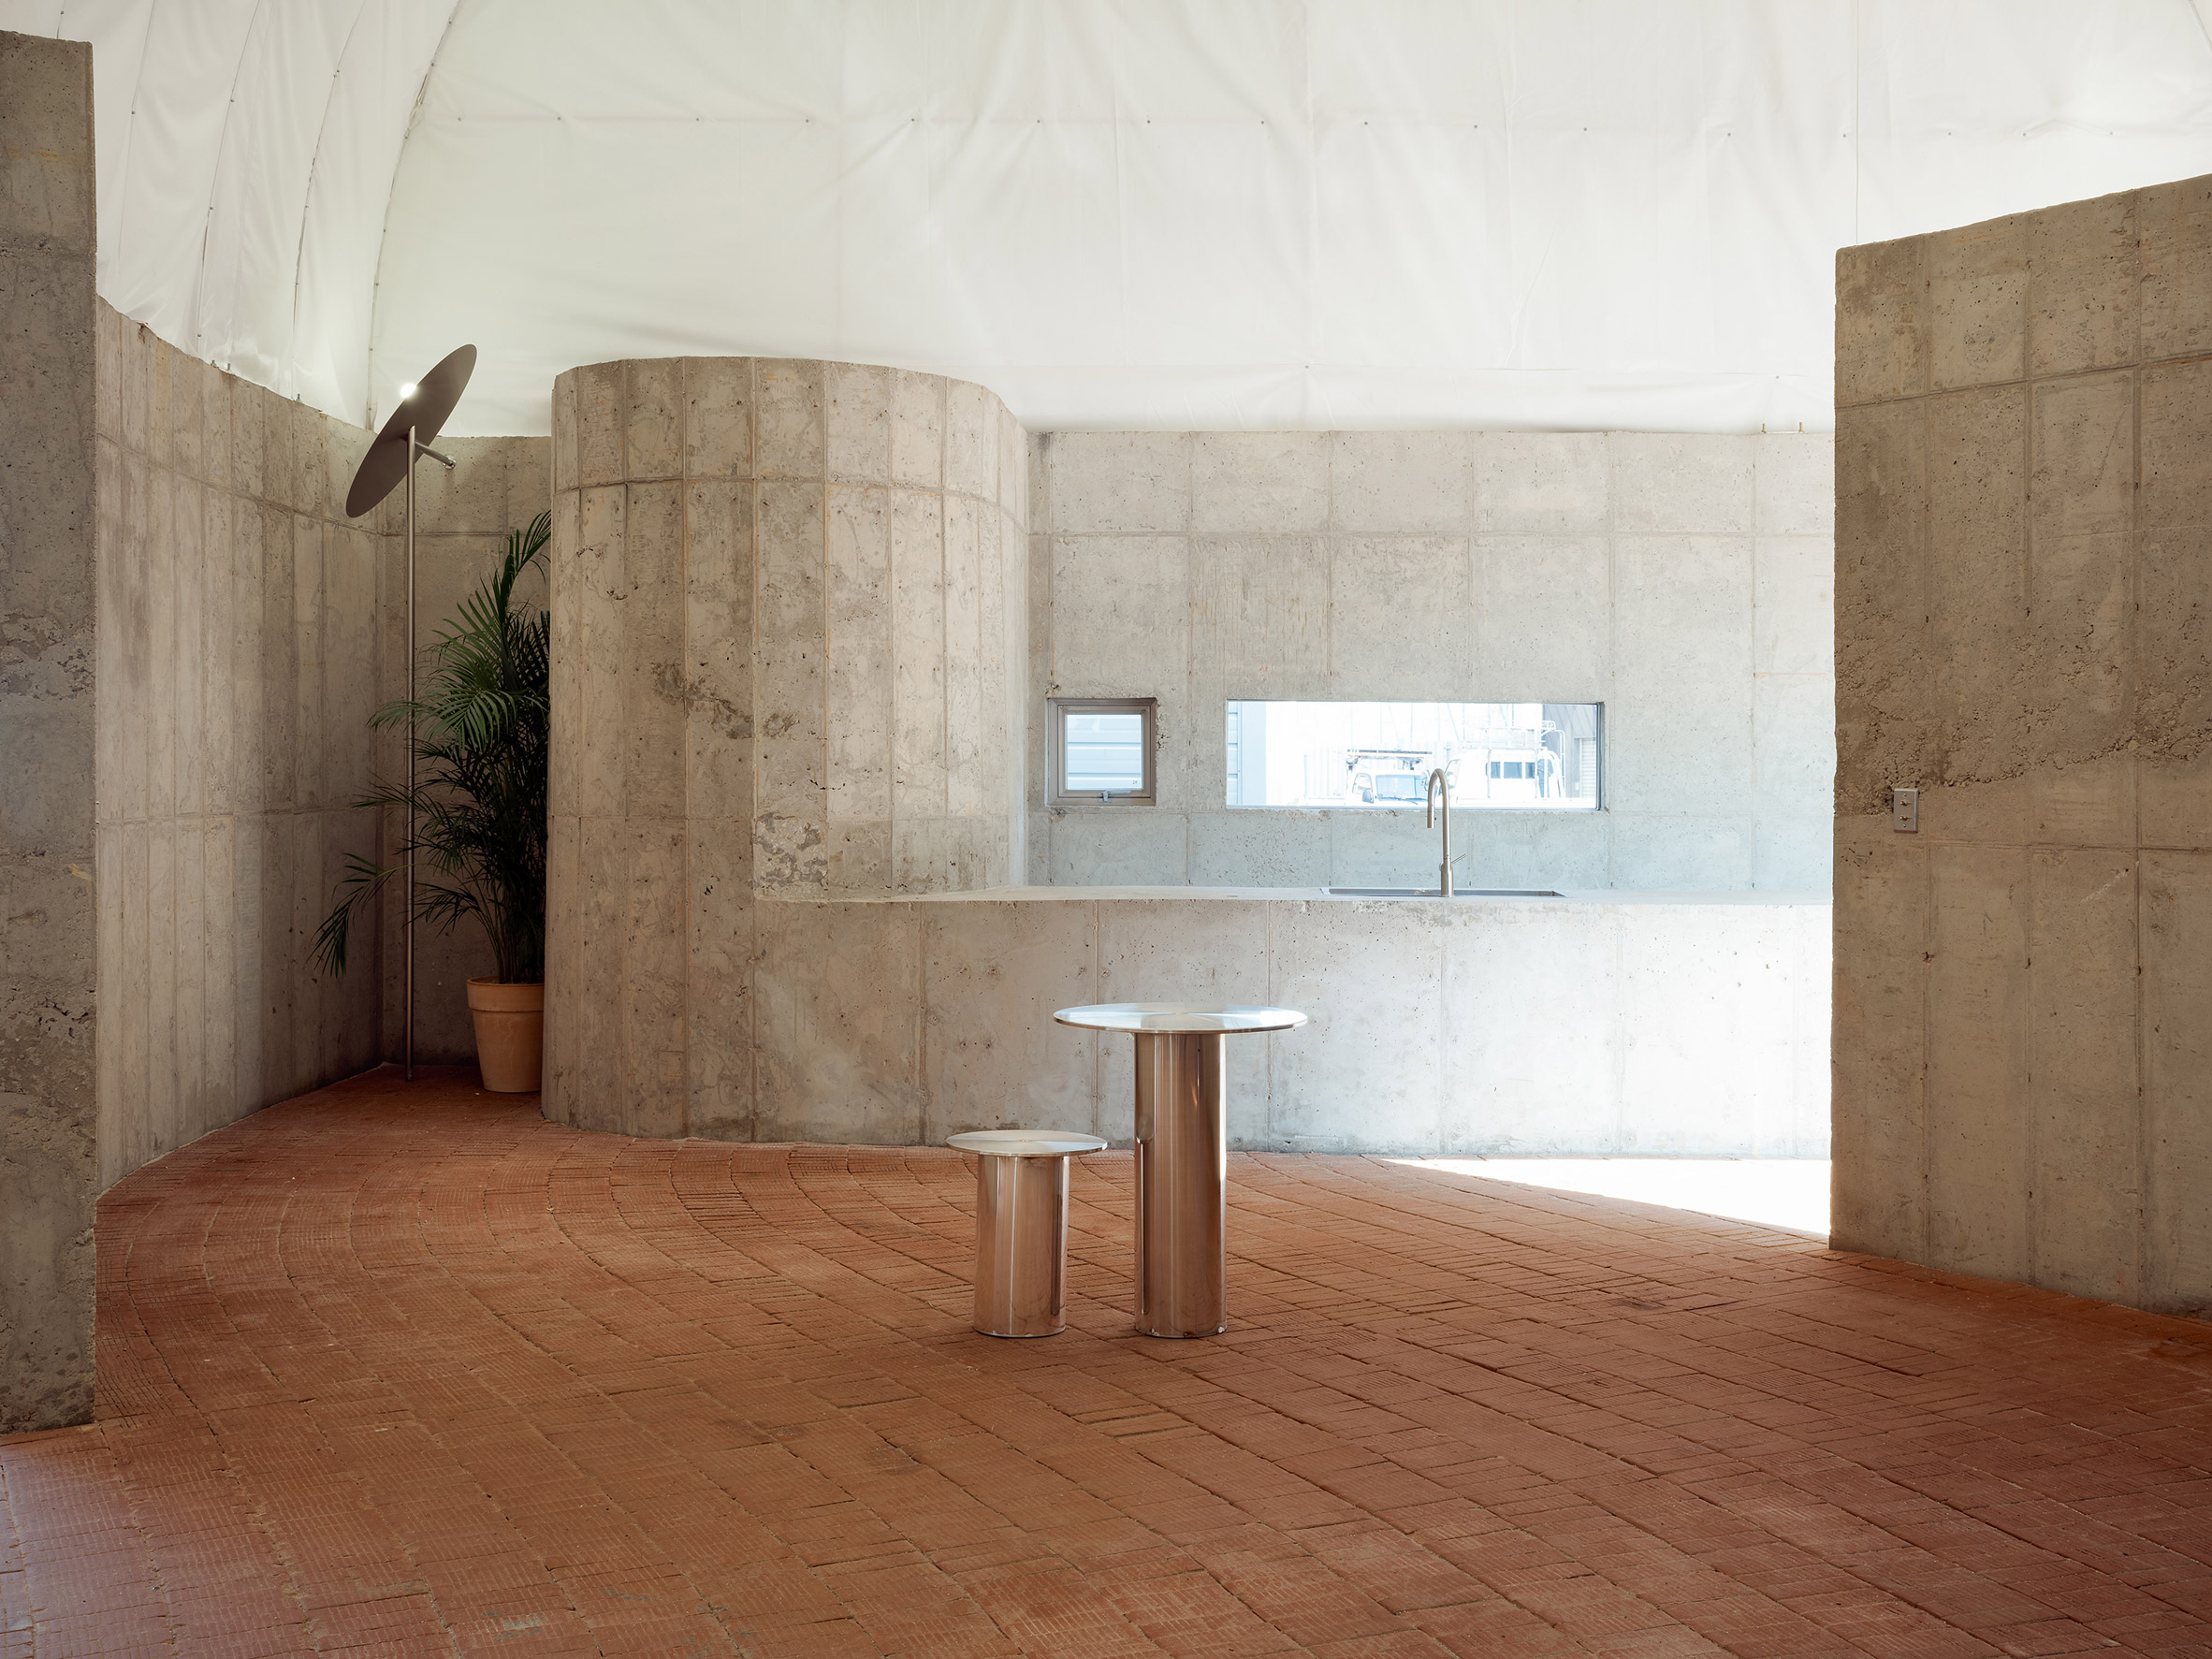 Concrete office space with brick floor